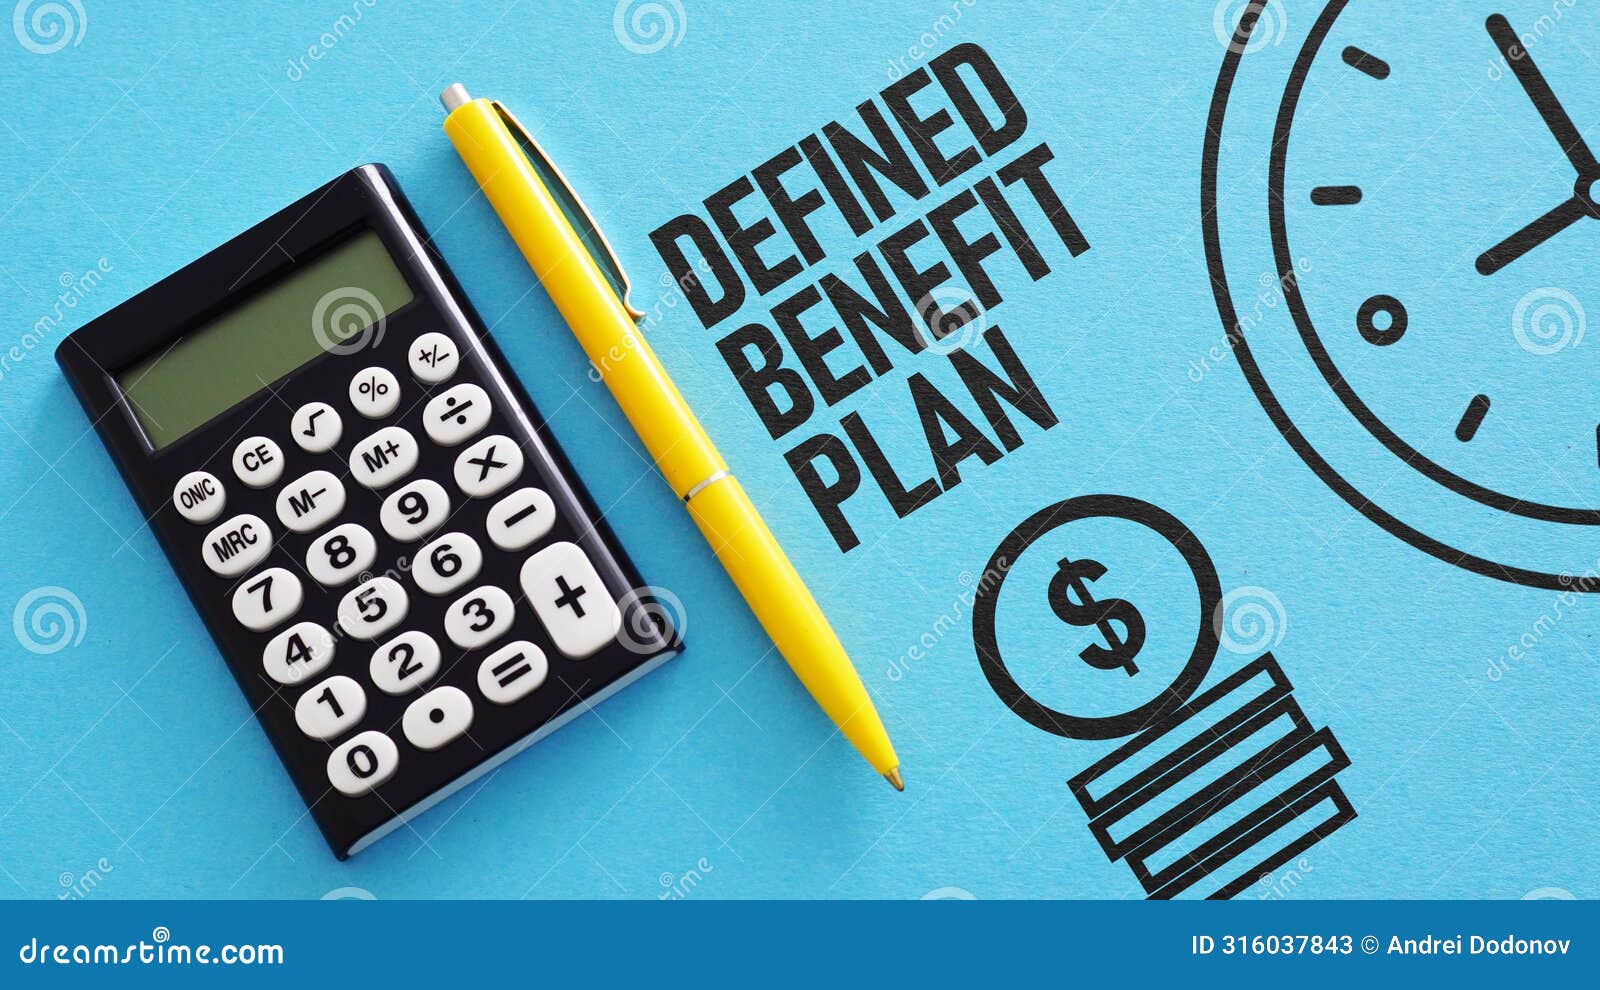 defined benefit plan is shown using the text